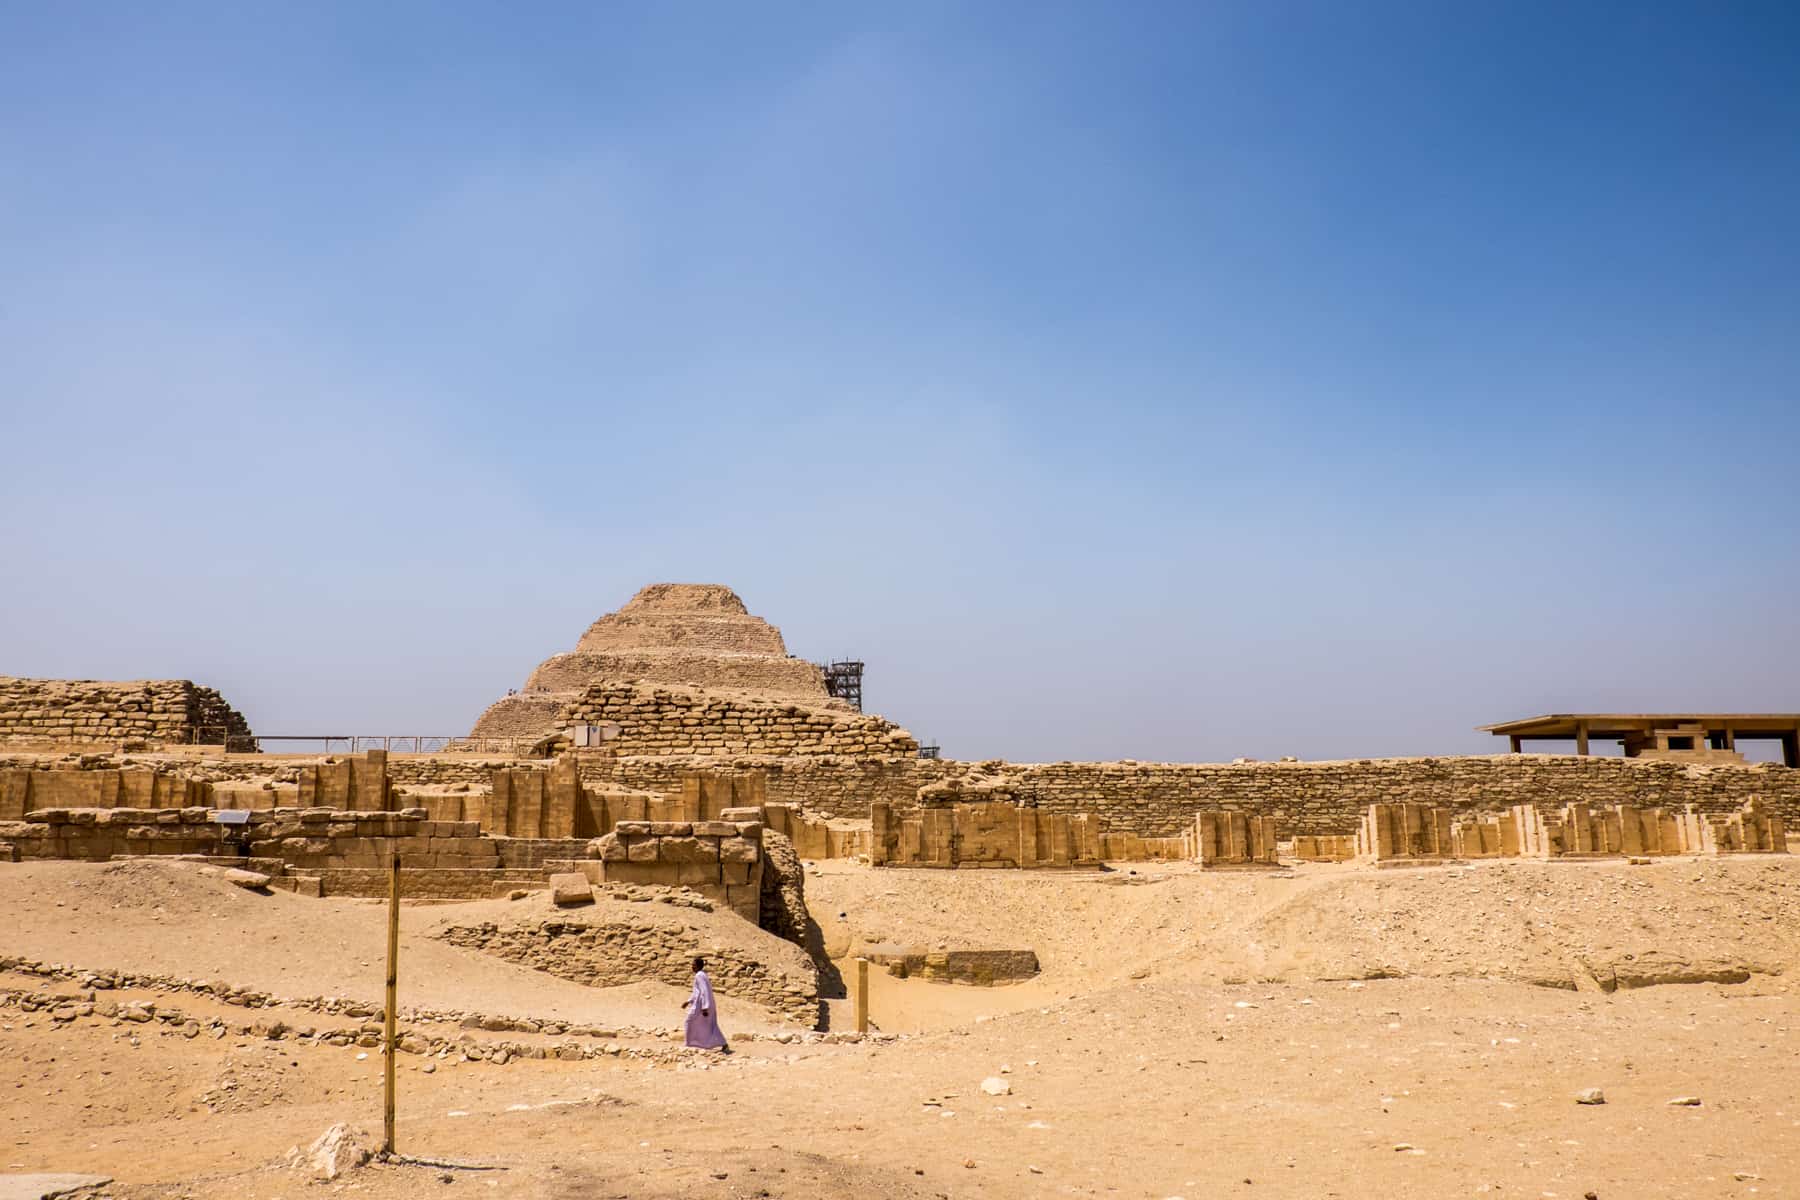 An Egyptian man in a purple robe walks in the sand in front of the step pyramid in Saqqara, Egypt